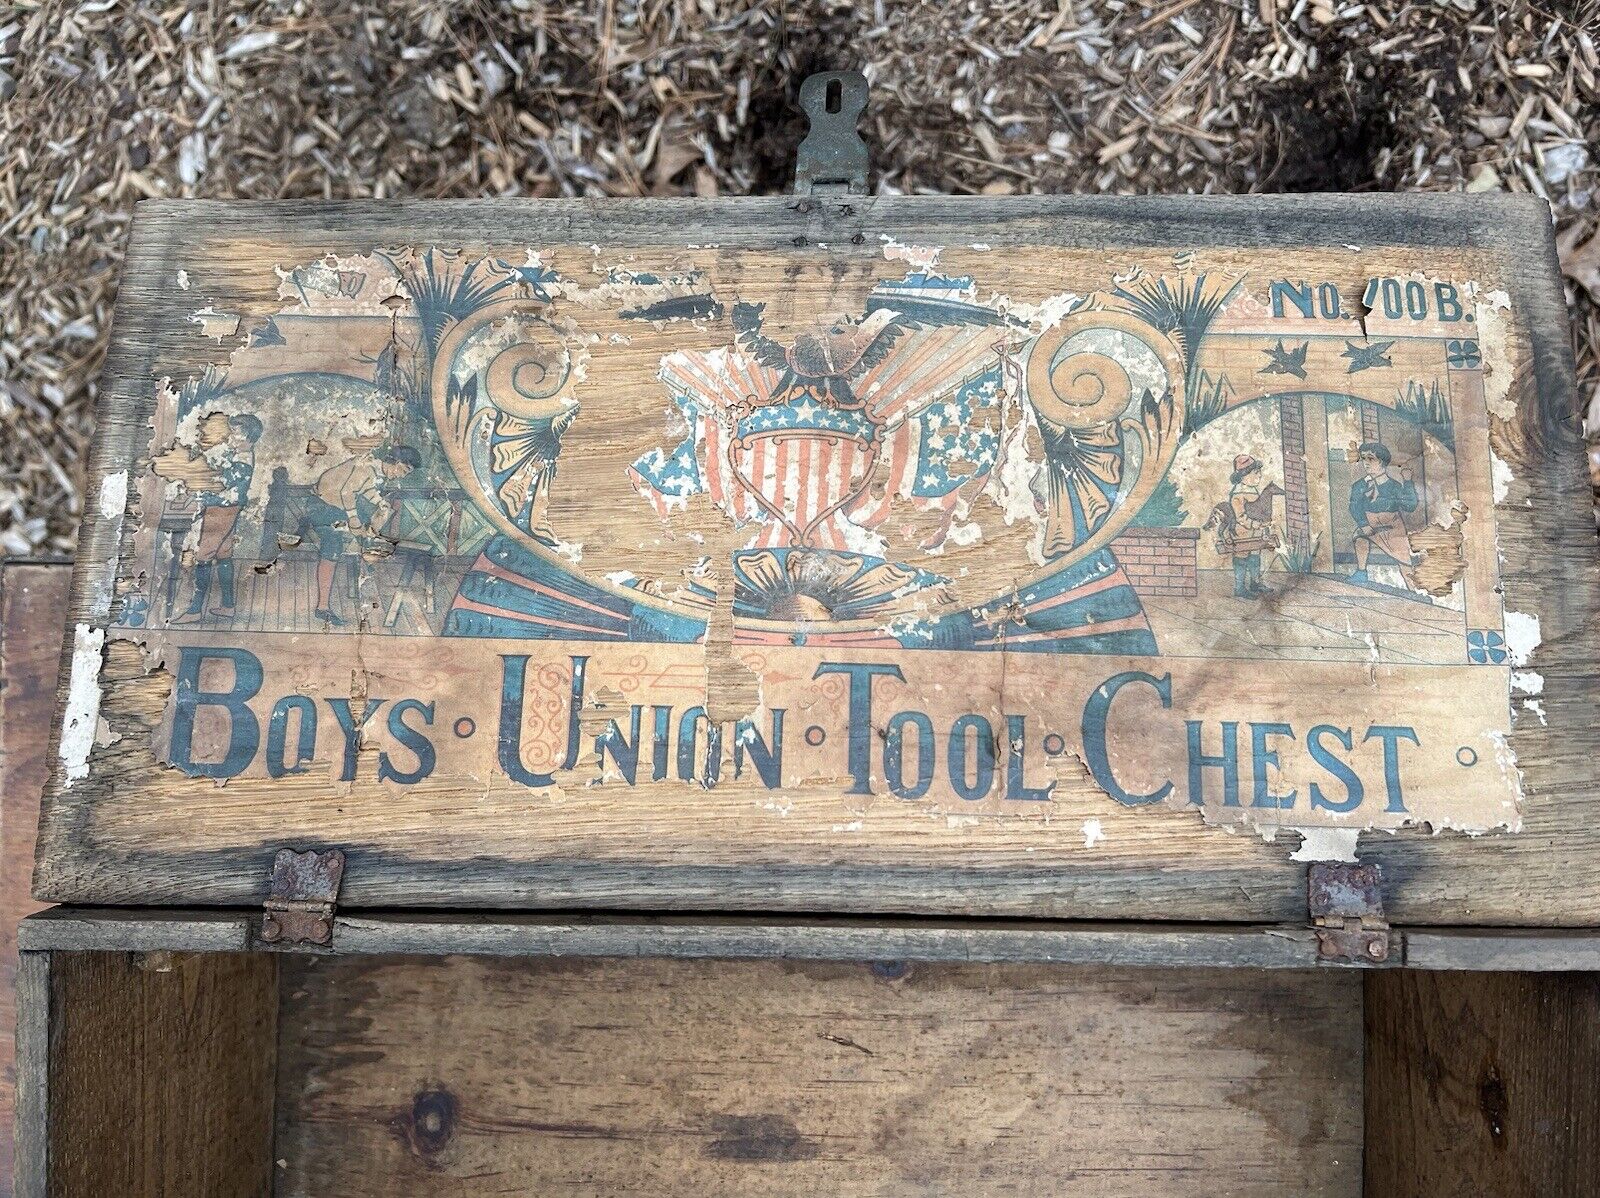 Vintage Bliss Boys Union Tool Chest Dove Tailed Wooden Box w/ Label. No. 900B